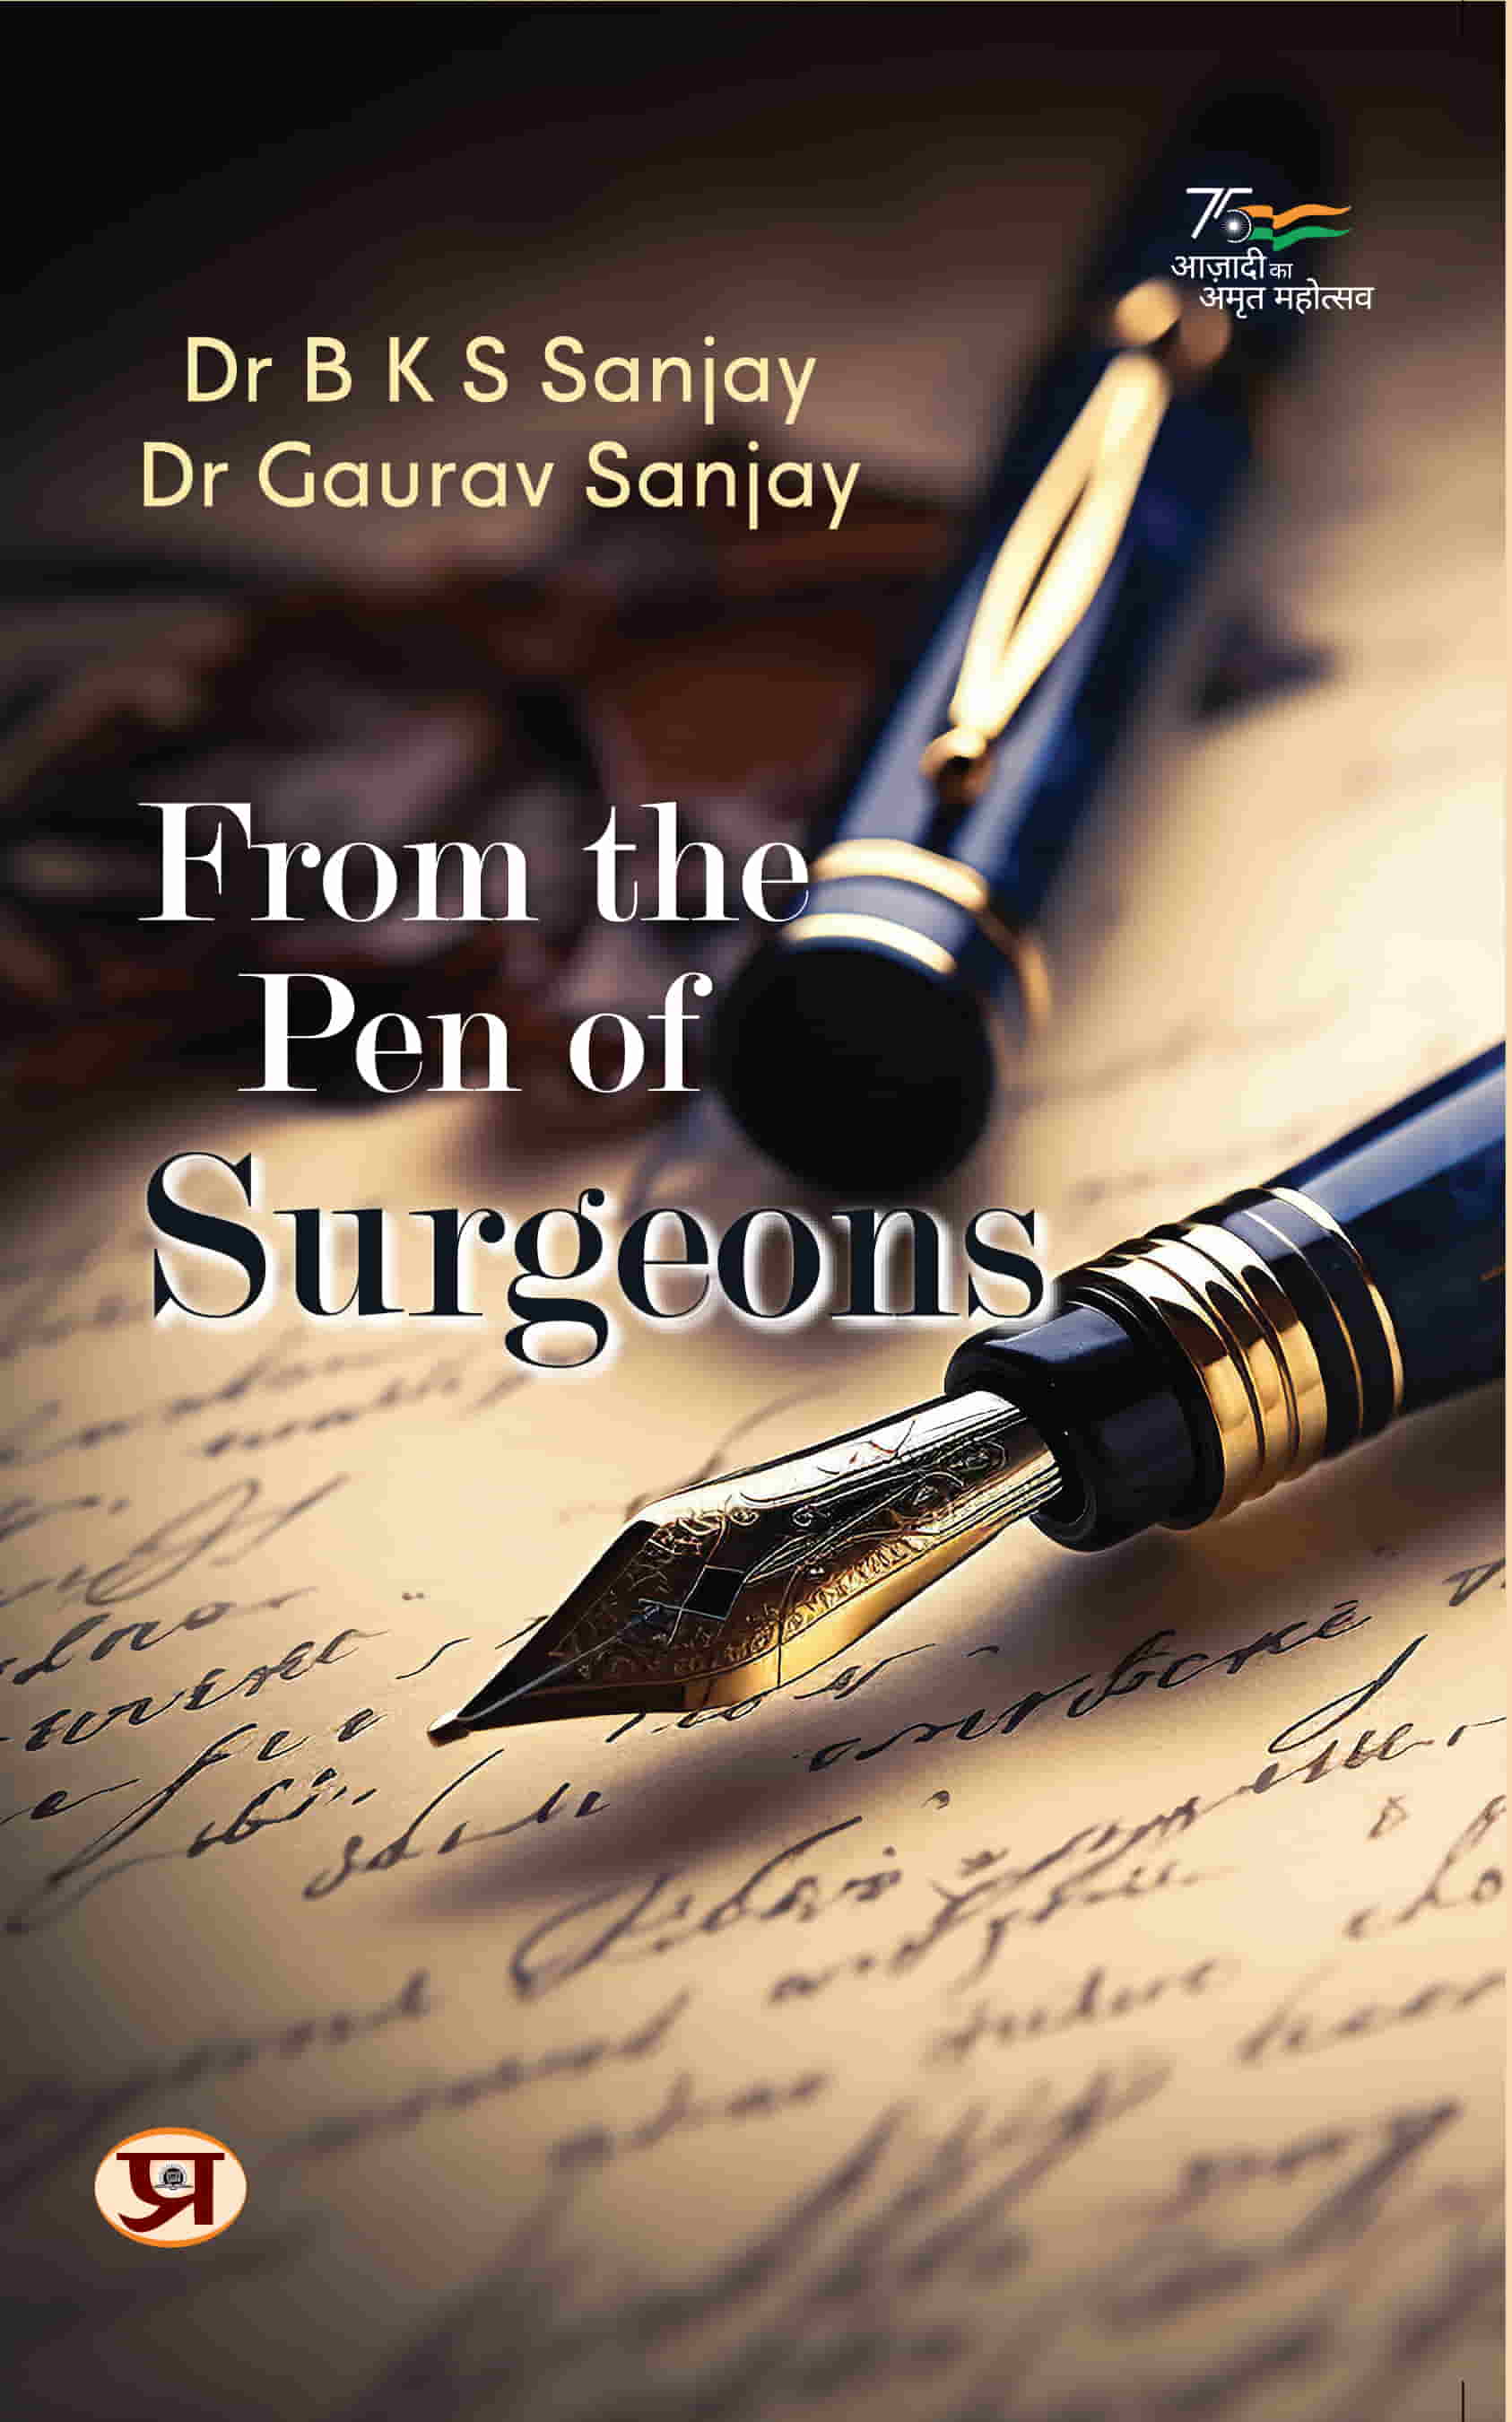 From The Pen of Surgeons | Well-Being of The Society